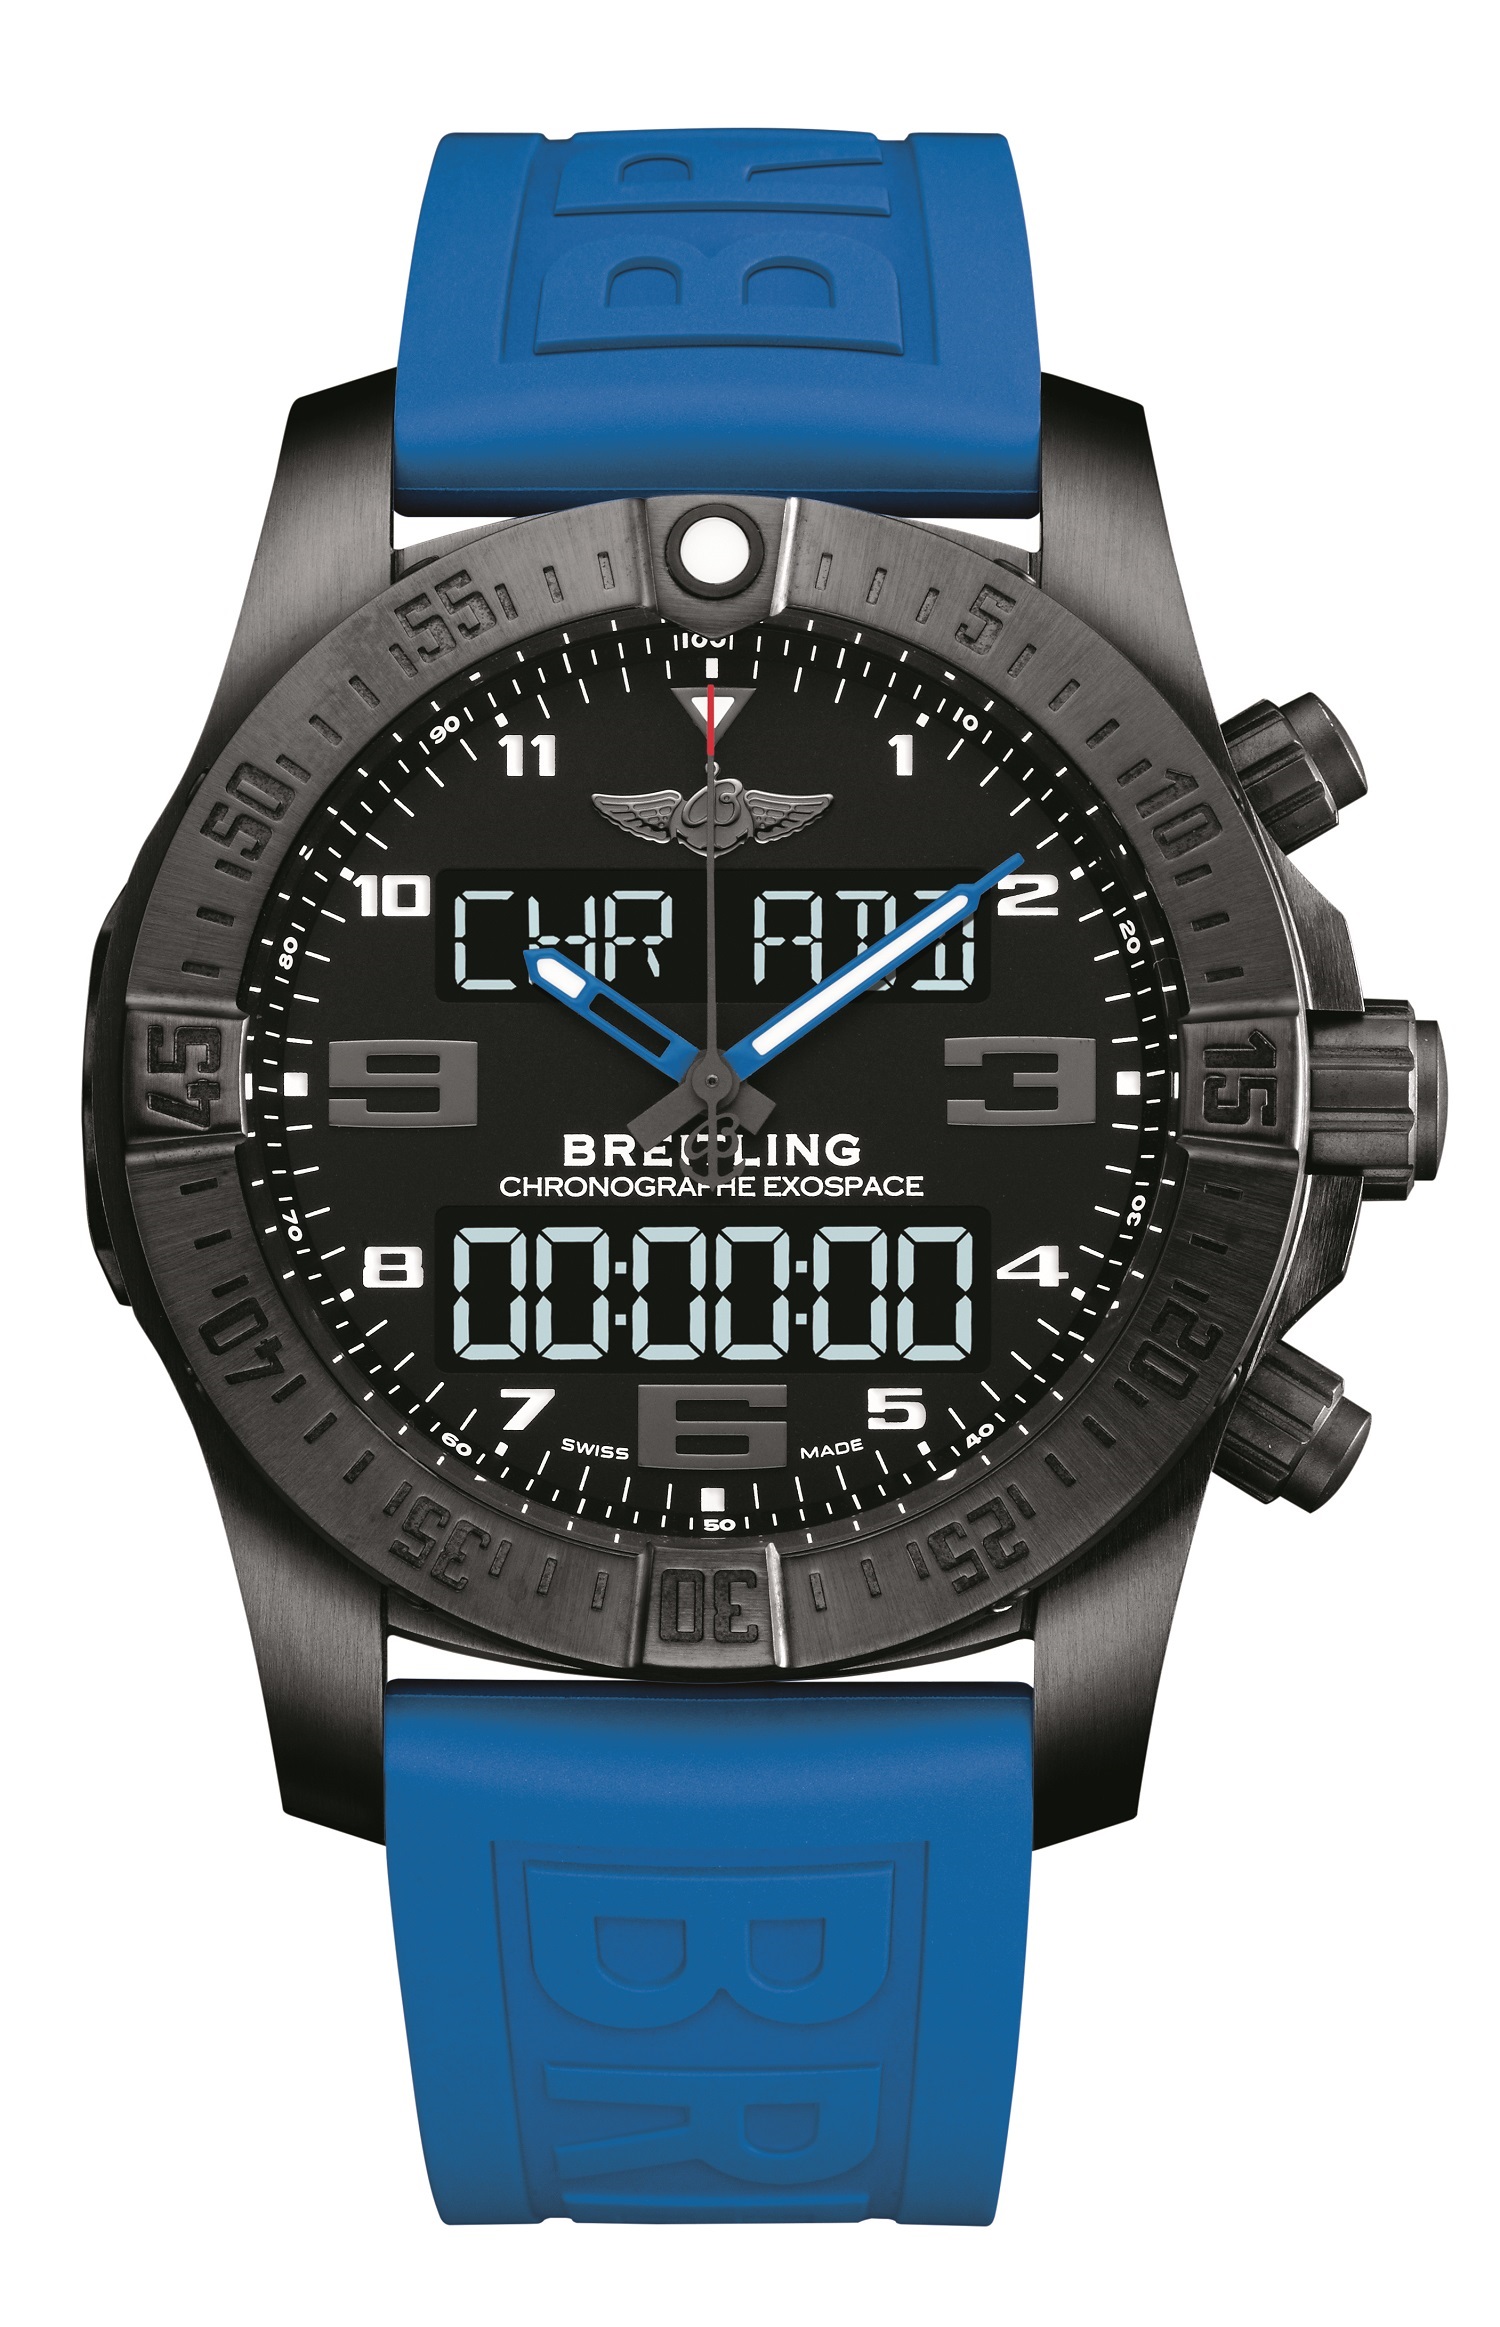 The Breitling Exospace B55 Connected